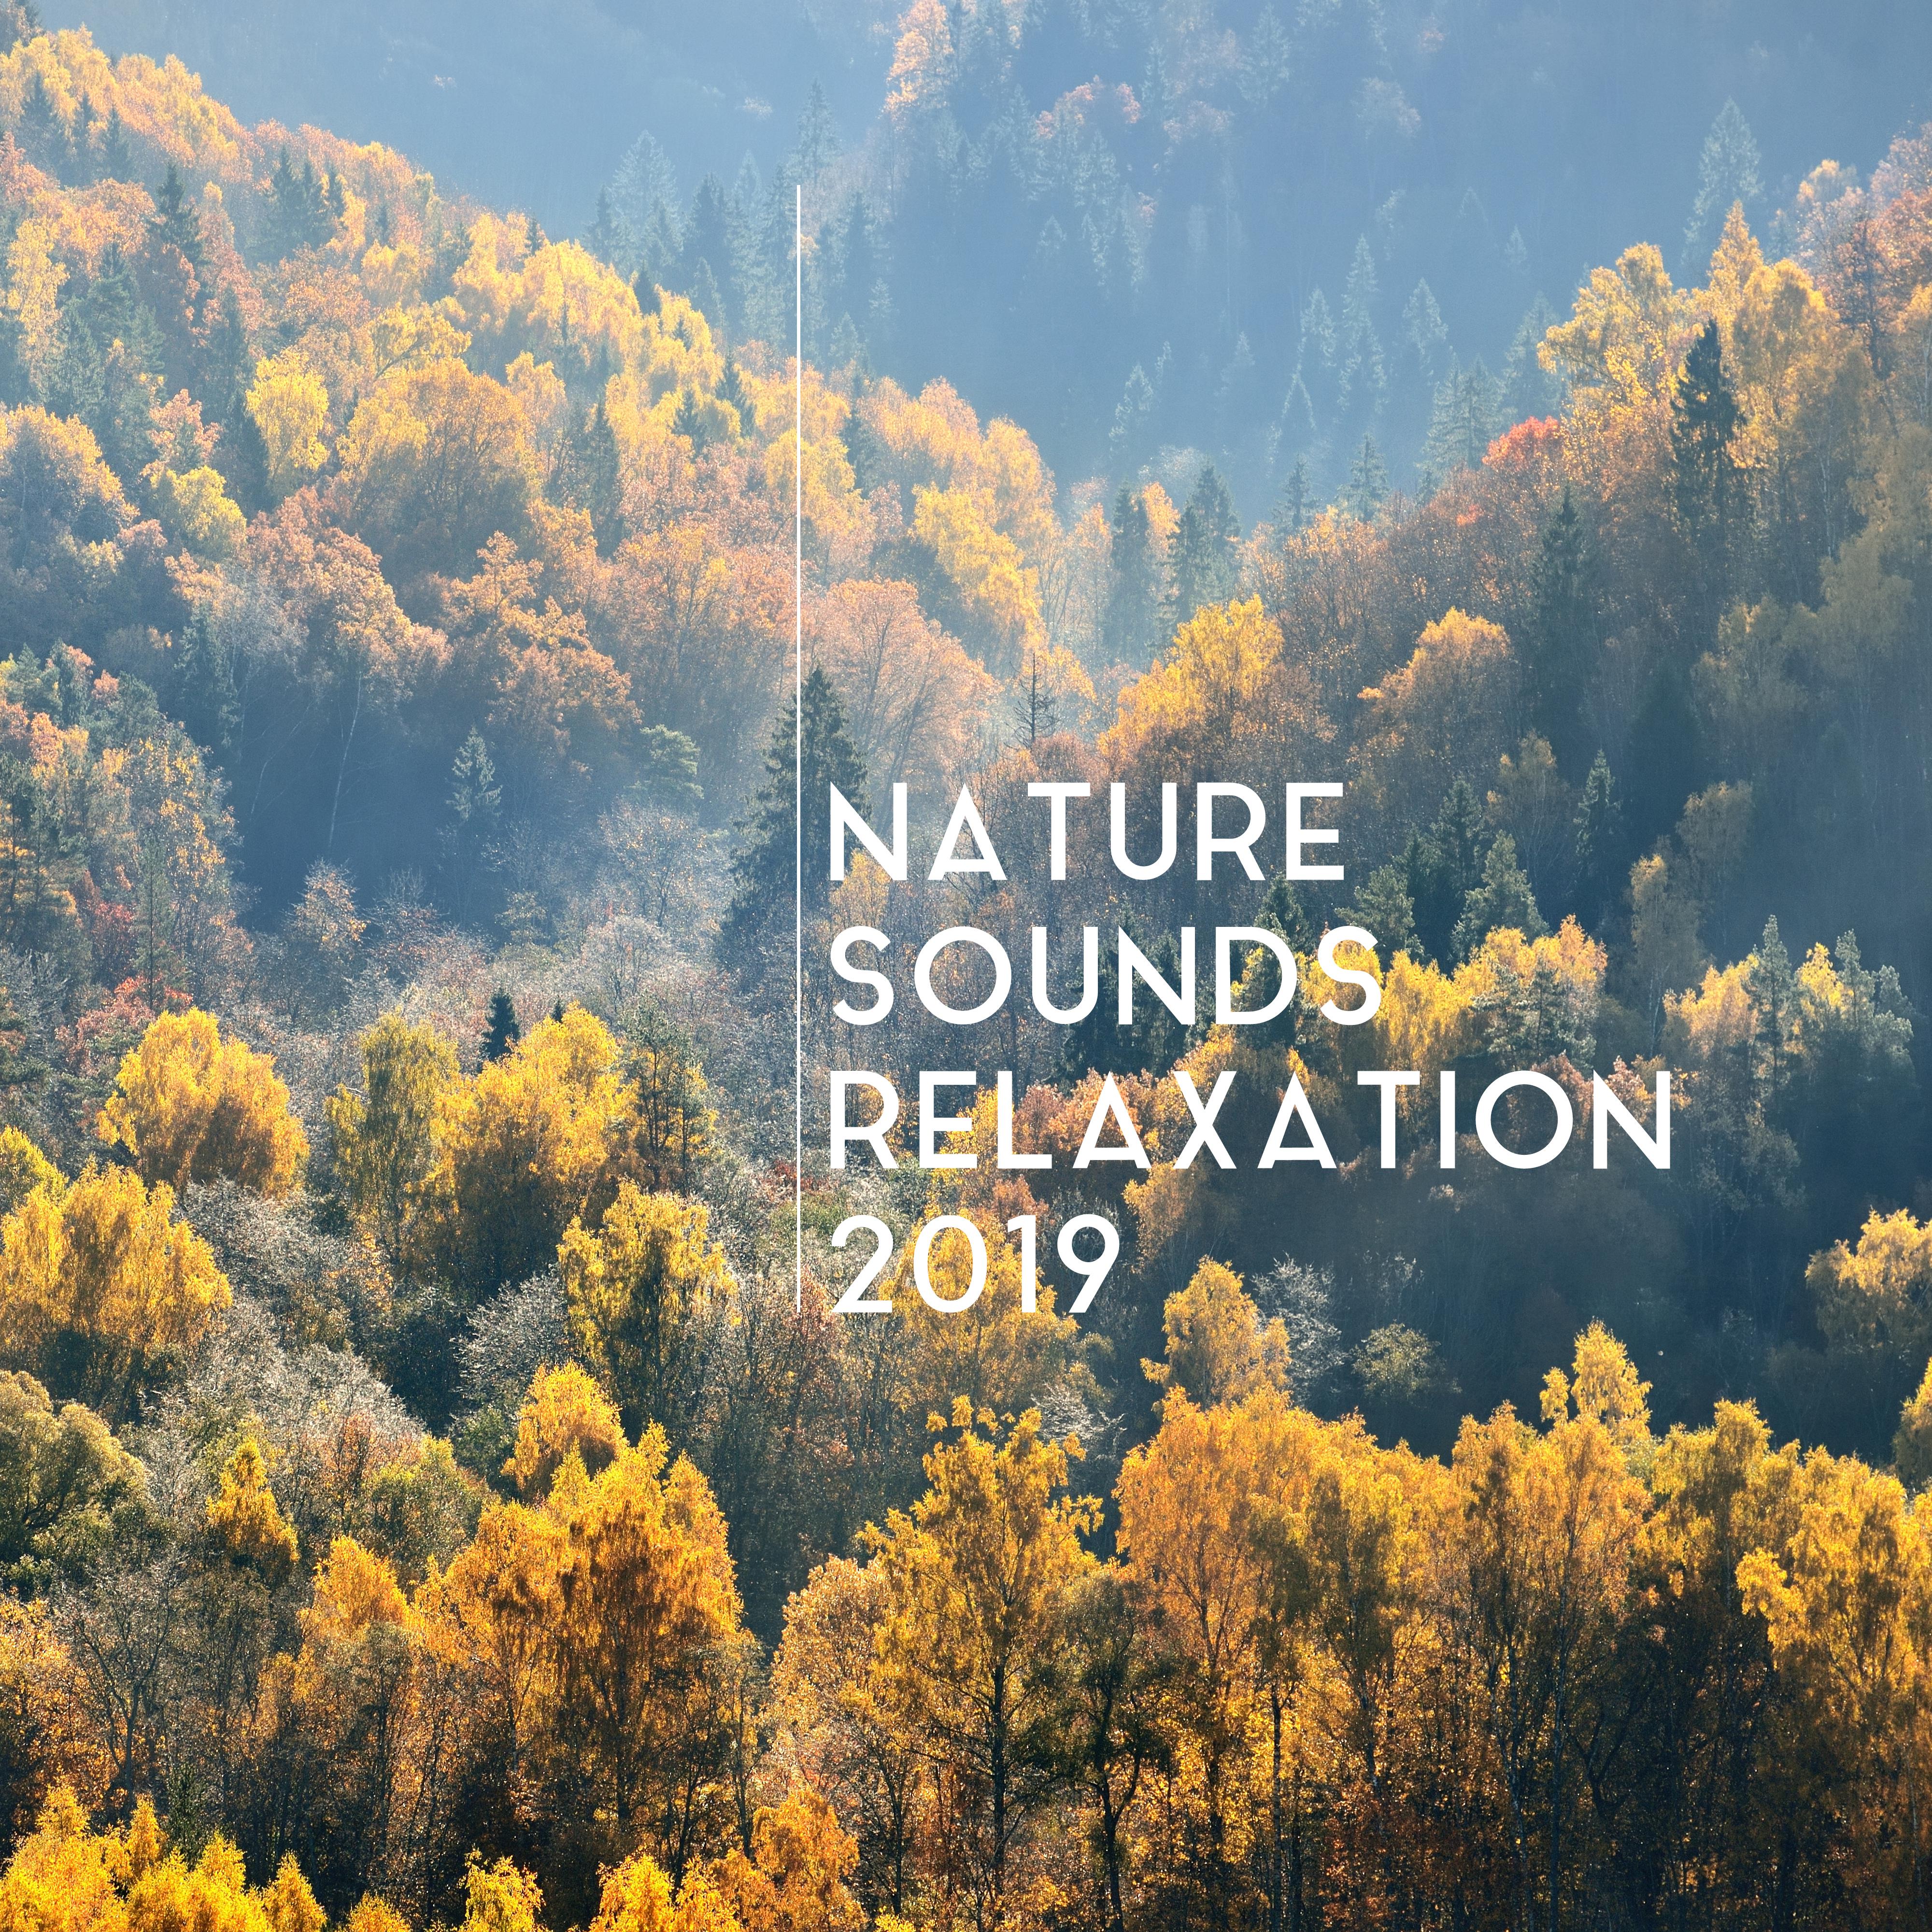 Nature Sounds Relaxation 2019: 15 Soothing New Age Songs for Perfect Relaxation After Tough Day, Stress Relief & Calming Down